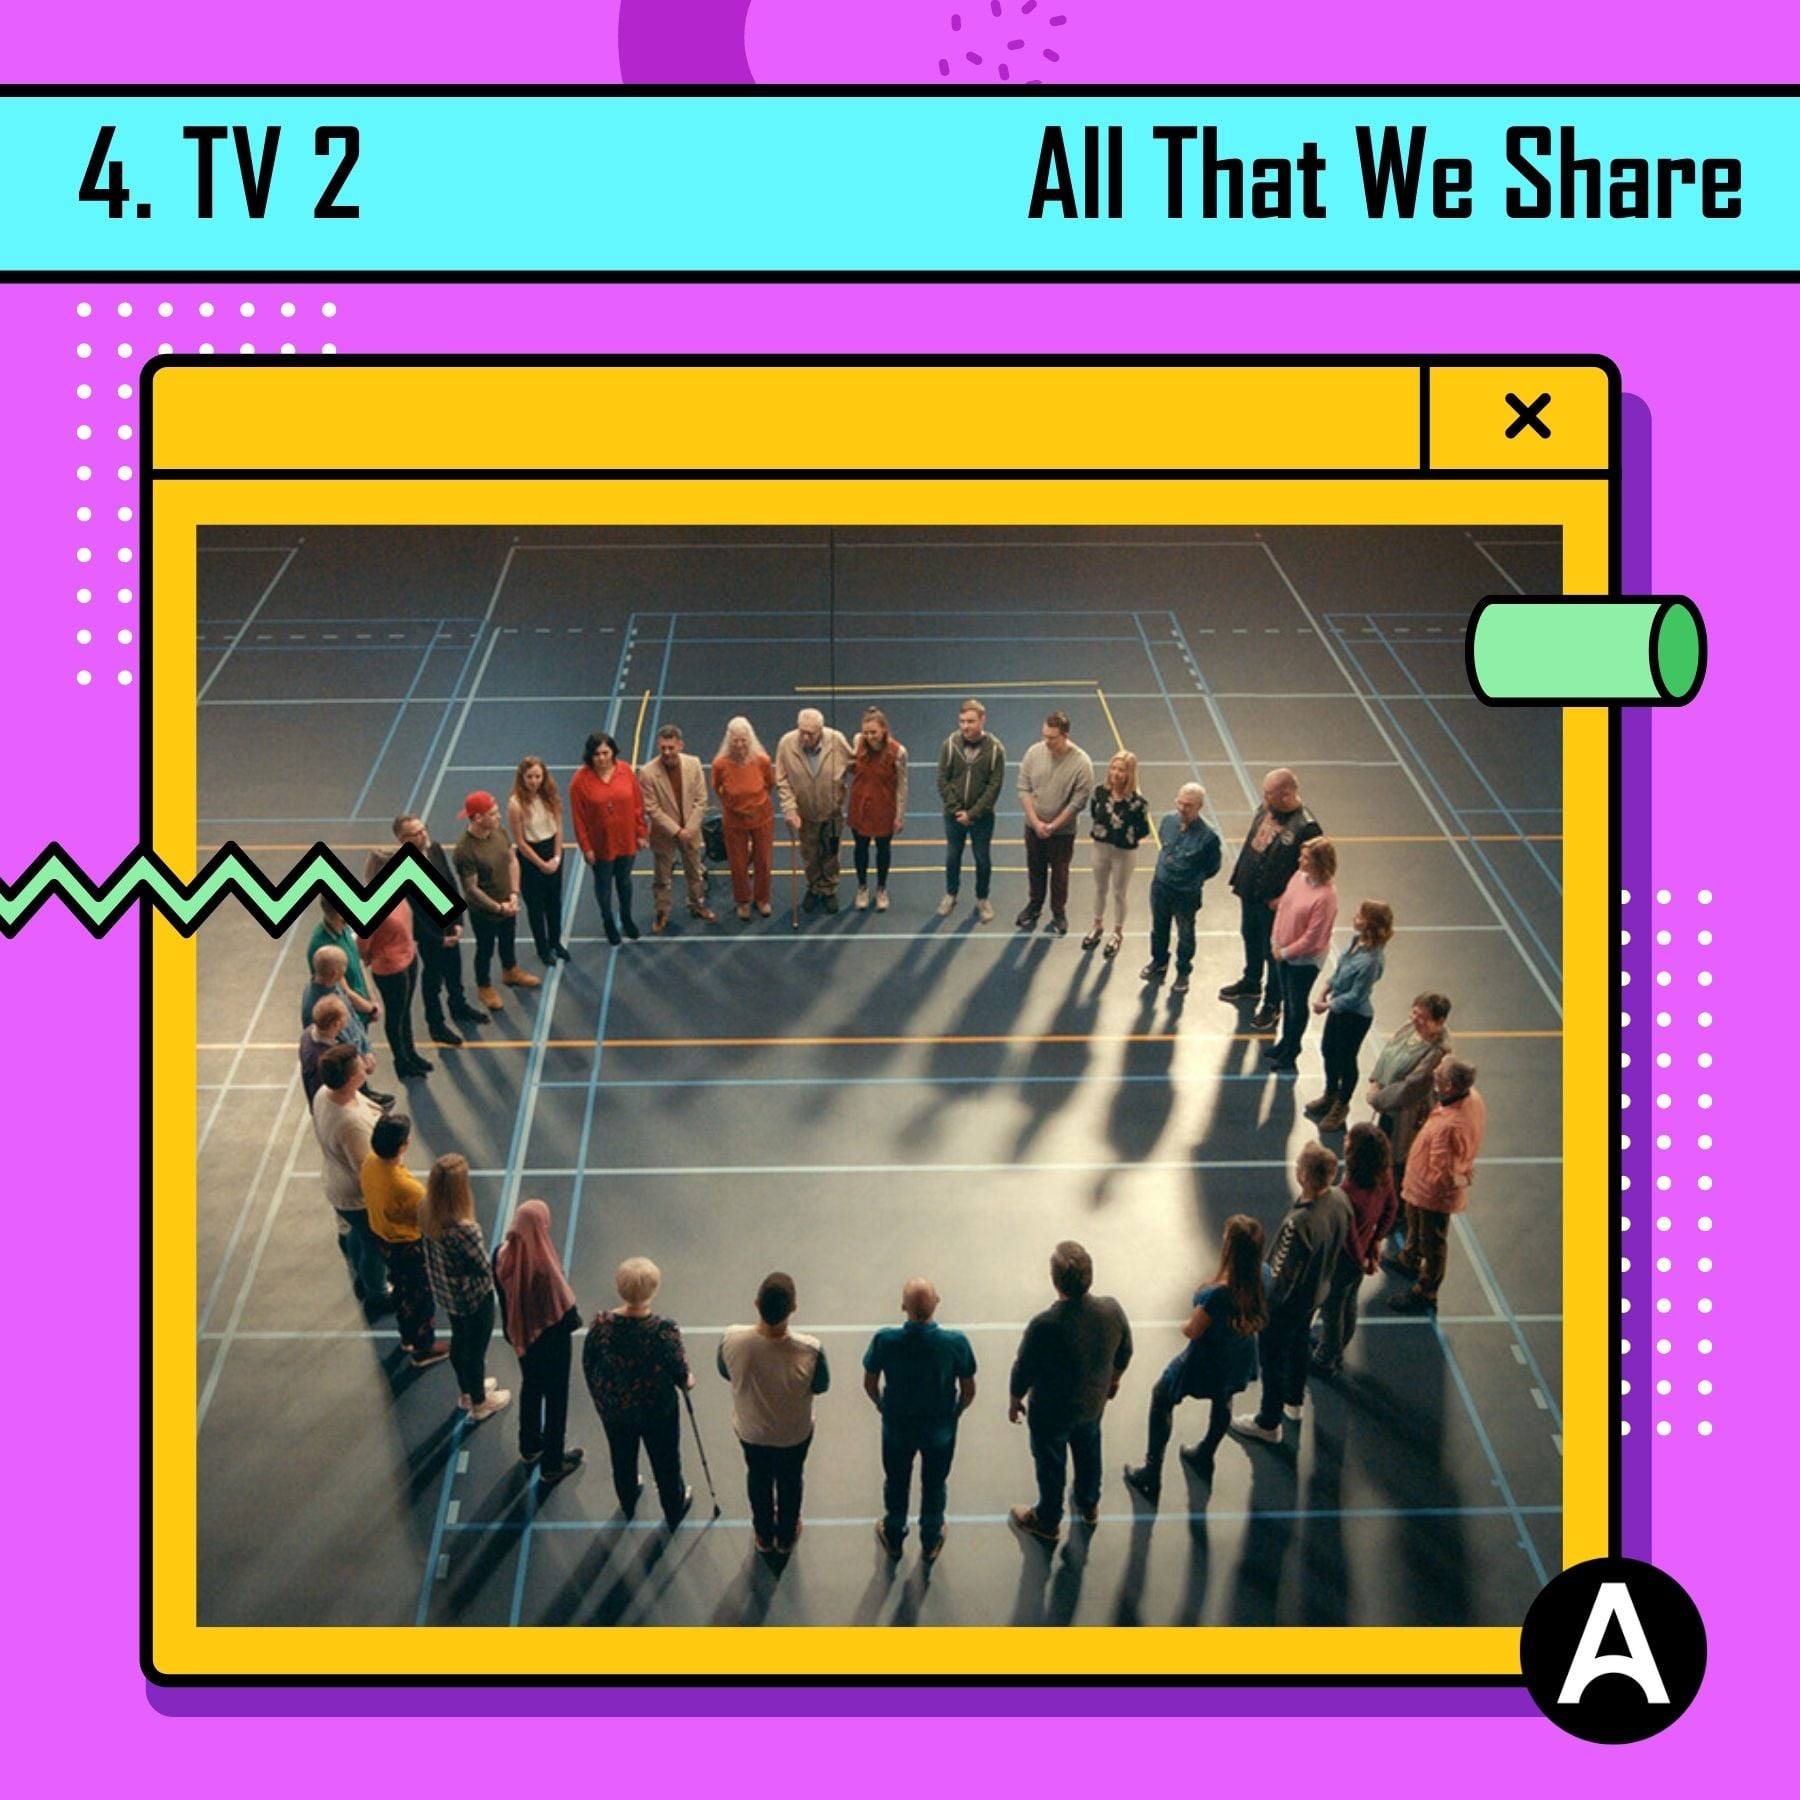 TV 2, “All That We Share”